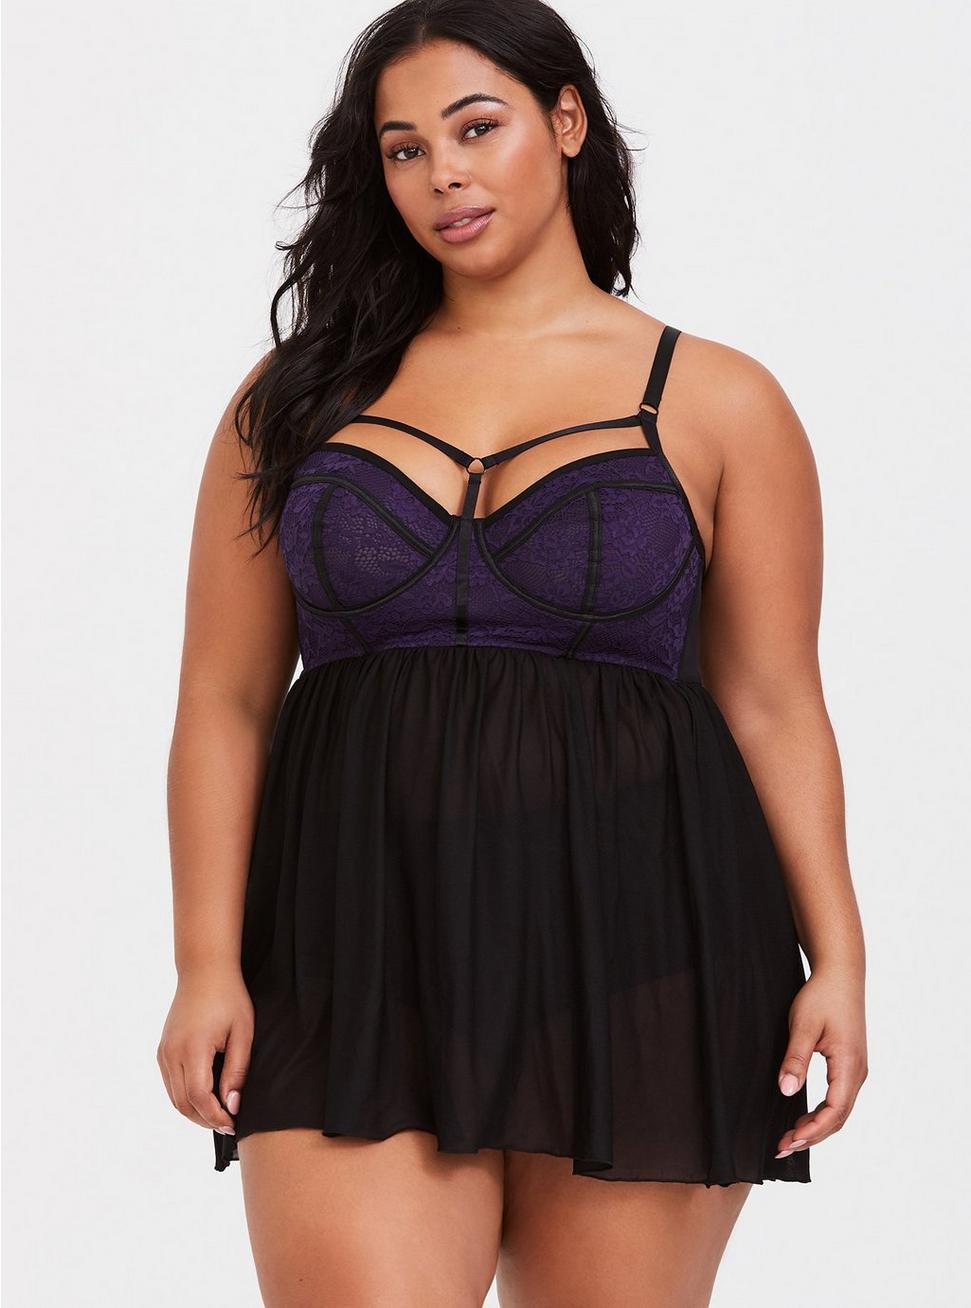 Strappy Mesh Babydoll With Piping At Cup, PURPLE, hi-res